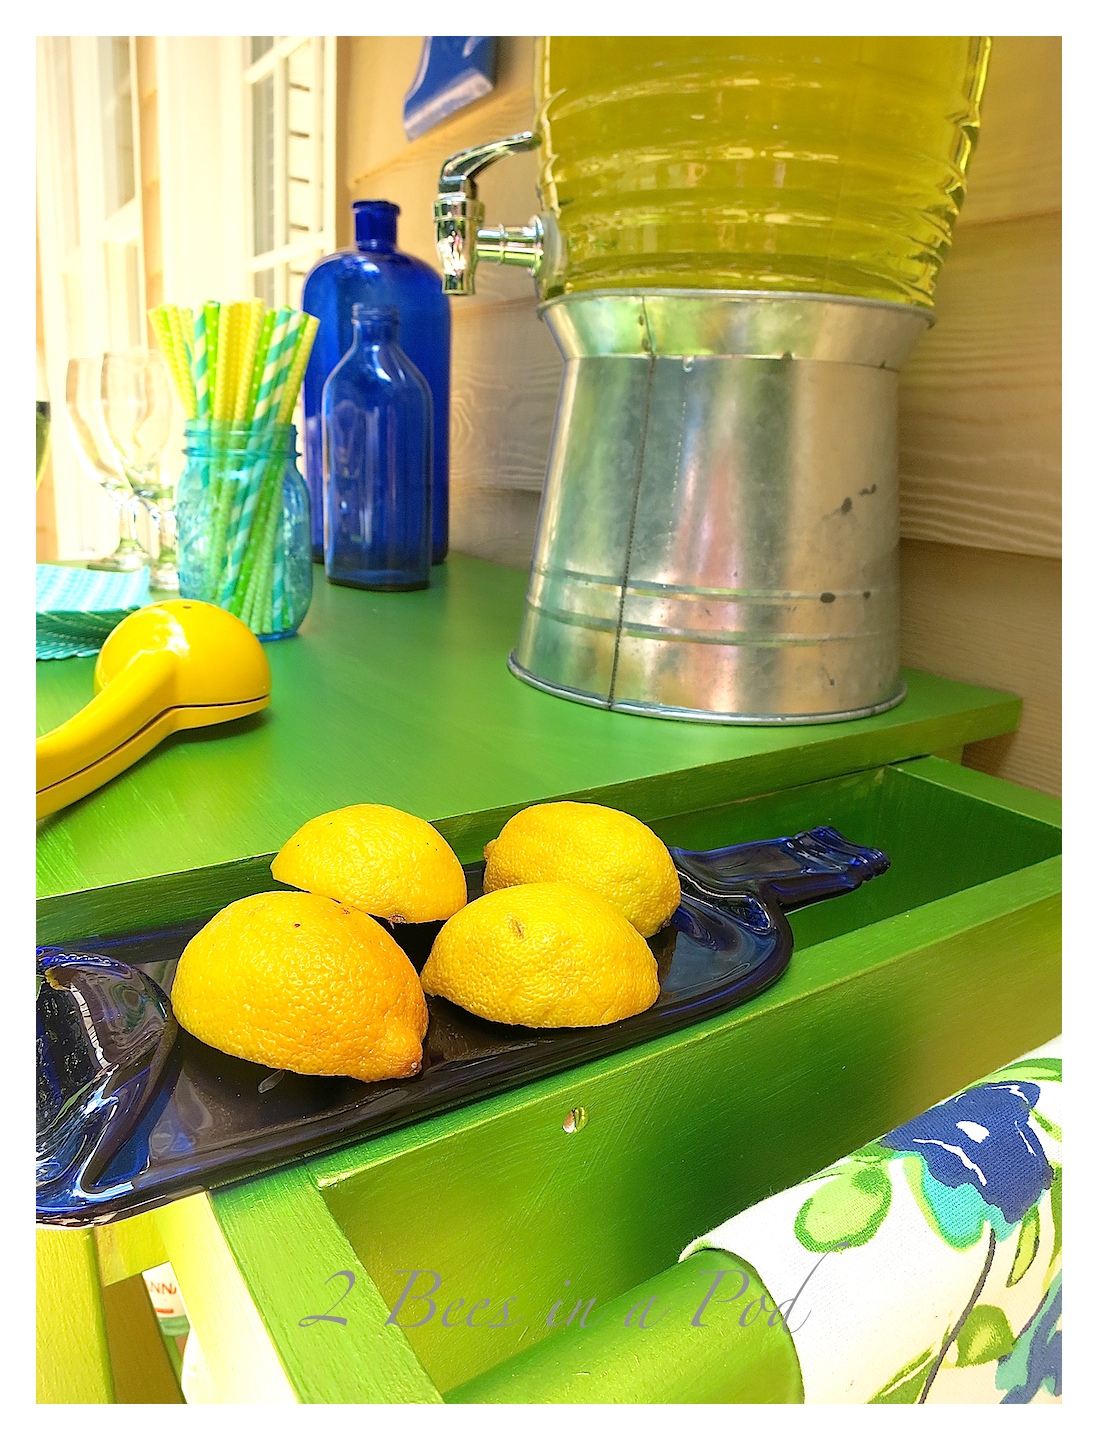 Microwave got a makeover into a stylish bar cart. By applying Modern Masters paint the cart took on a very colorful and polished look.